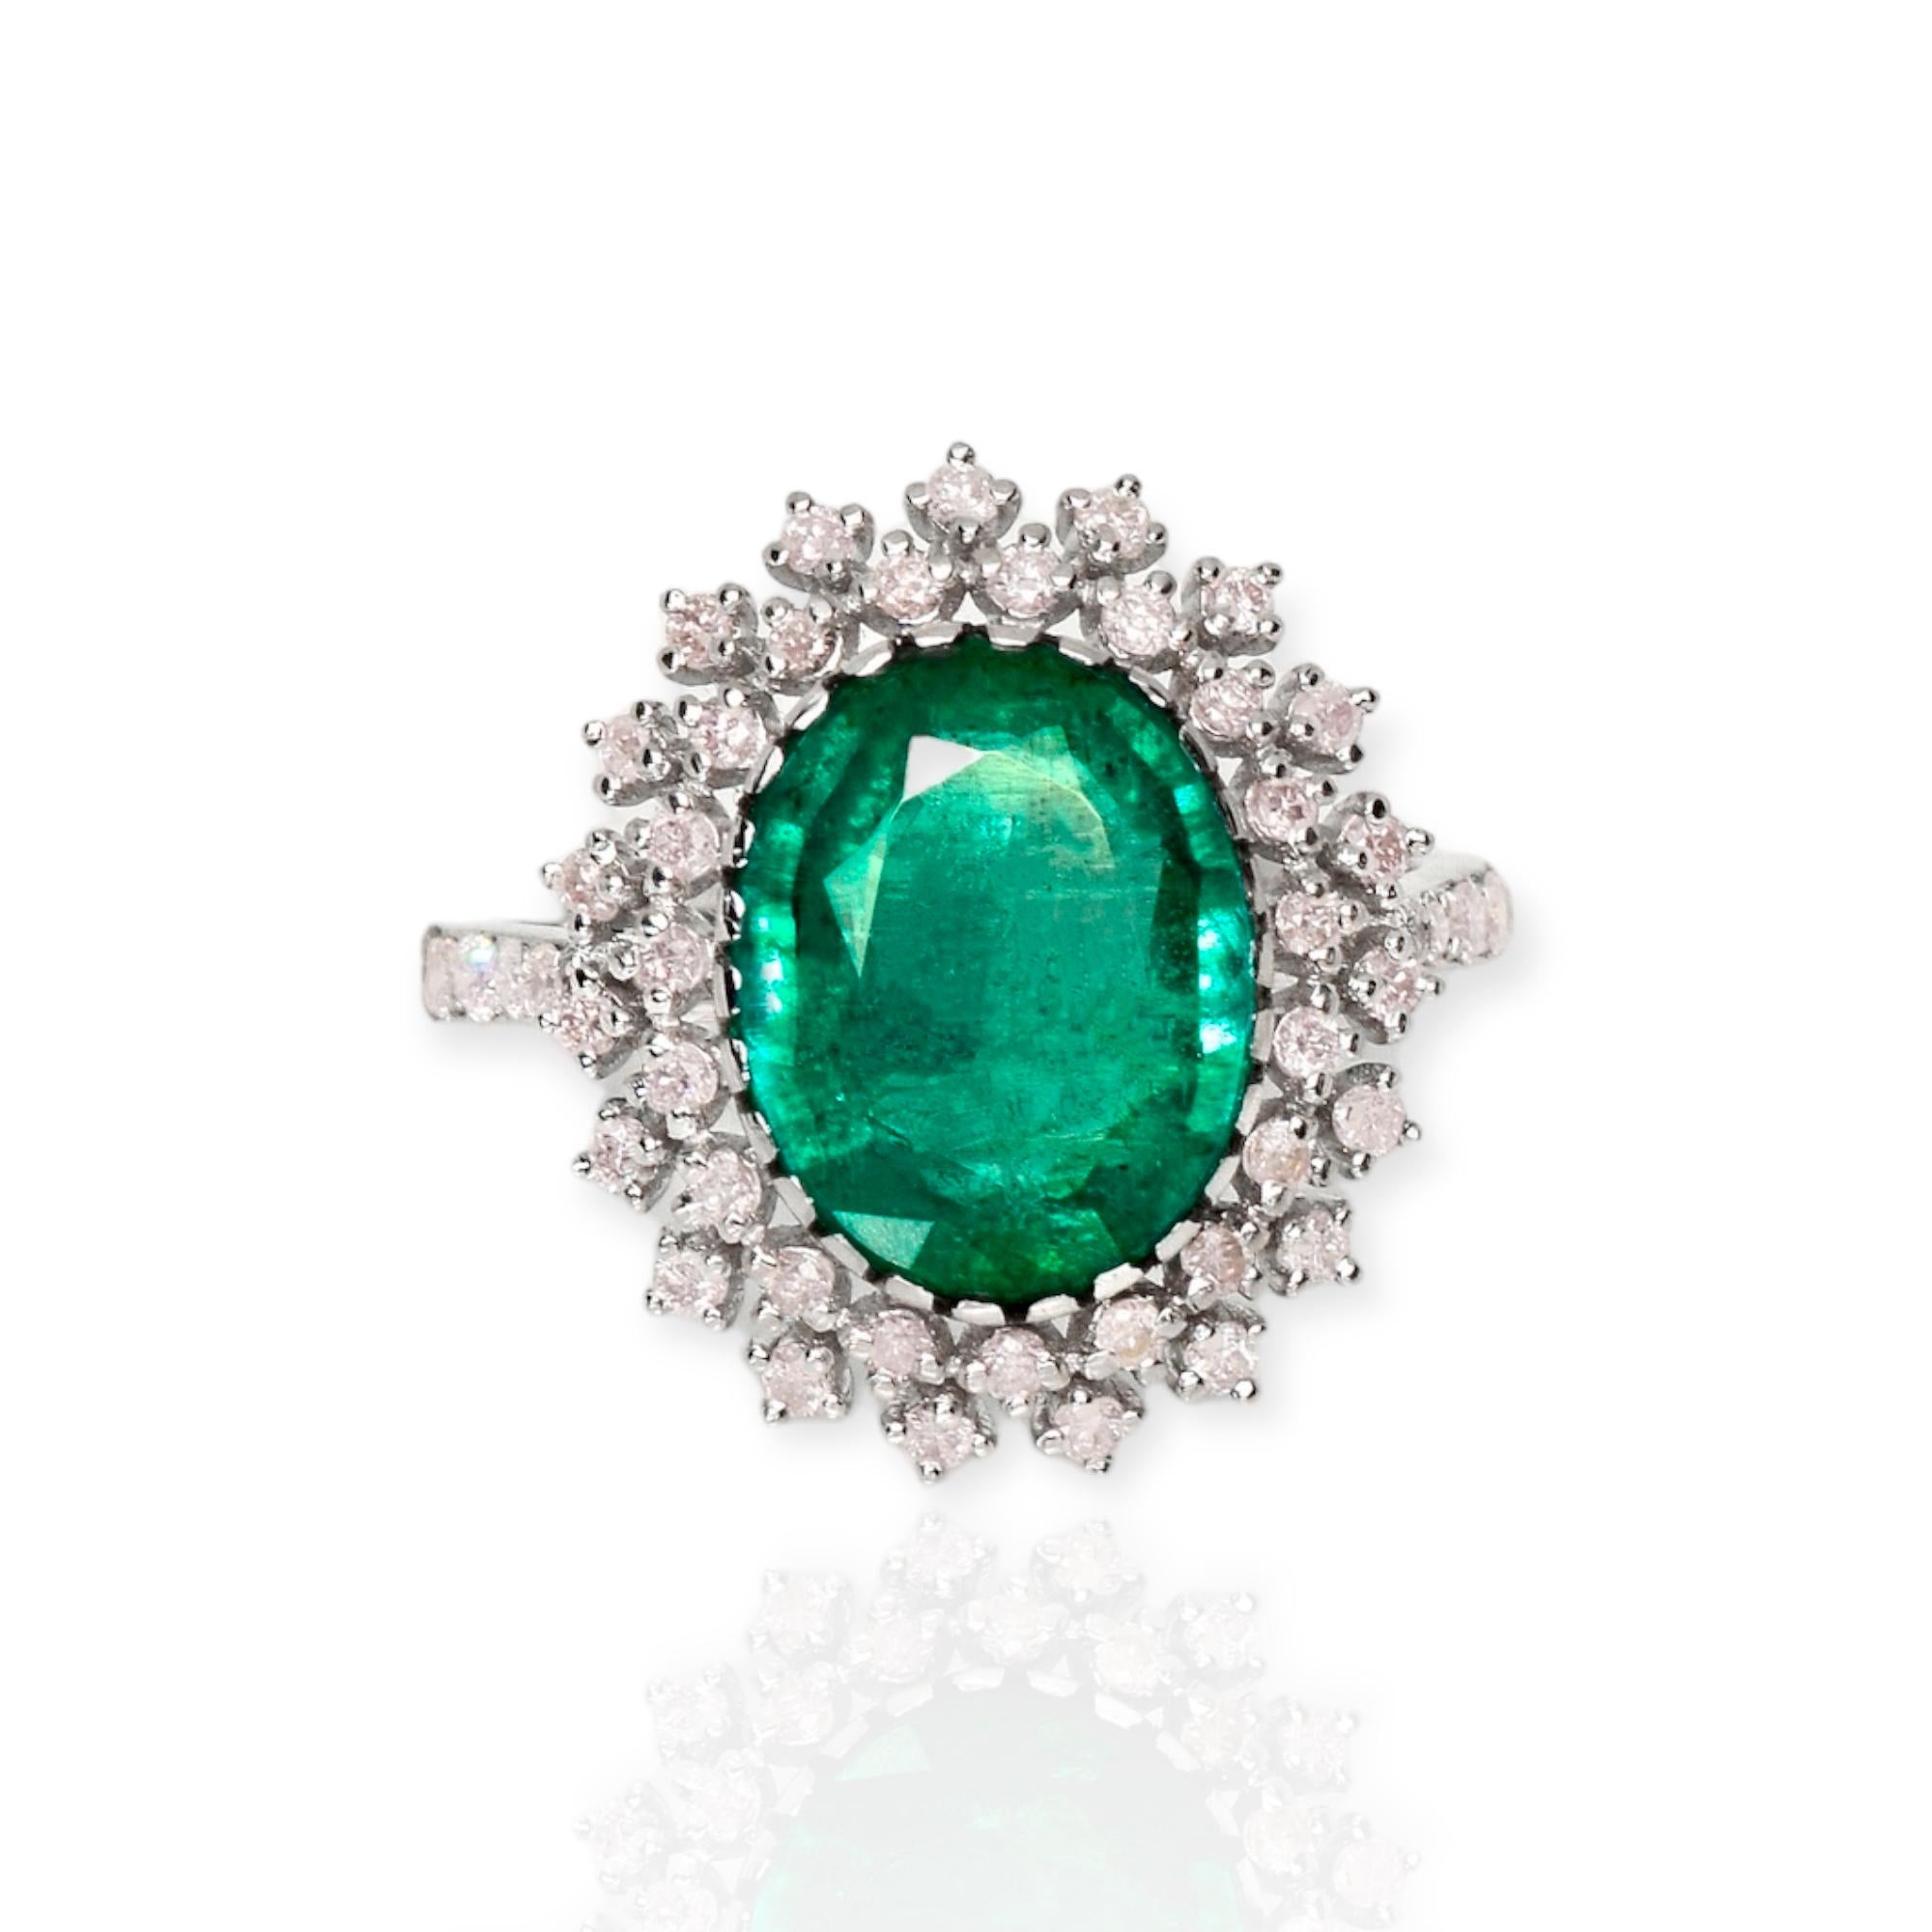 **IGI 14K White Gold 3.33 ct Emerald&Pink Diamonds Antique Art Deco Style Engagement Ring** 

An IGI-certified natural Zambia green emerald weighing 3.33 ct is set on an 14K white gold arc deco design band with natural pink diamonds weighing 0.66